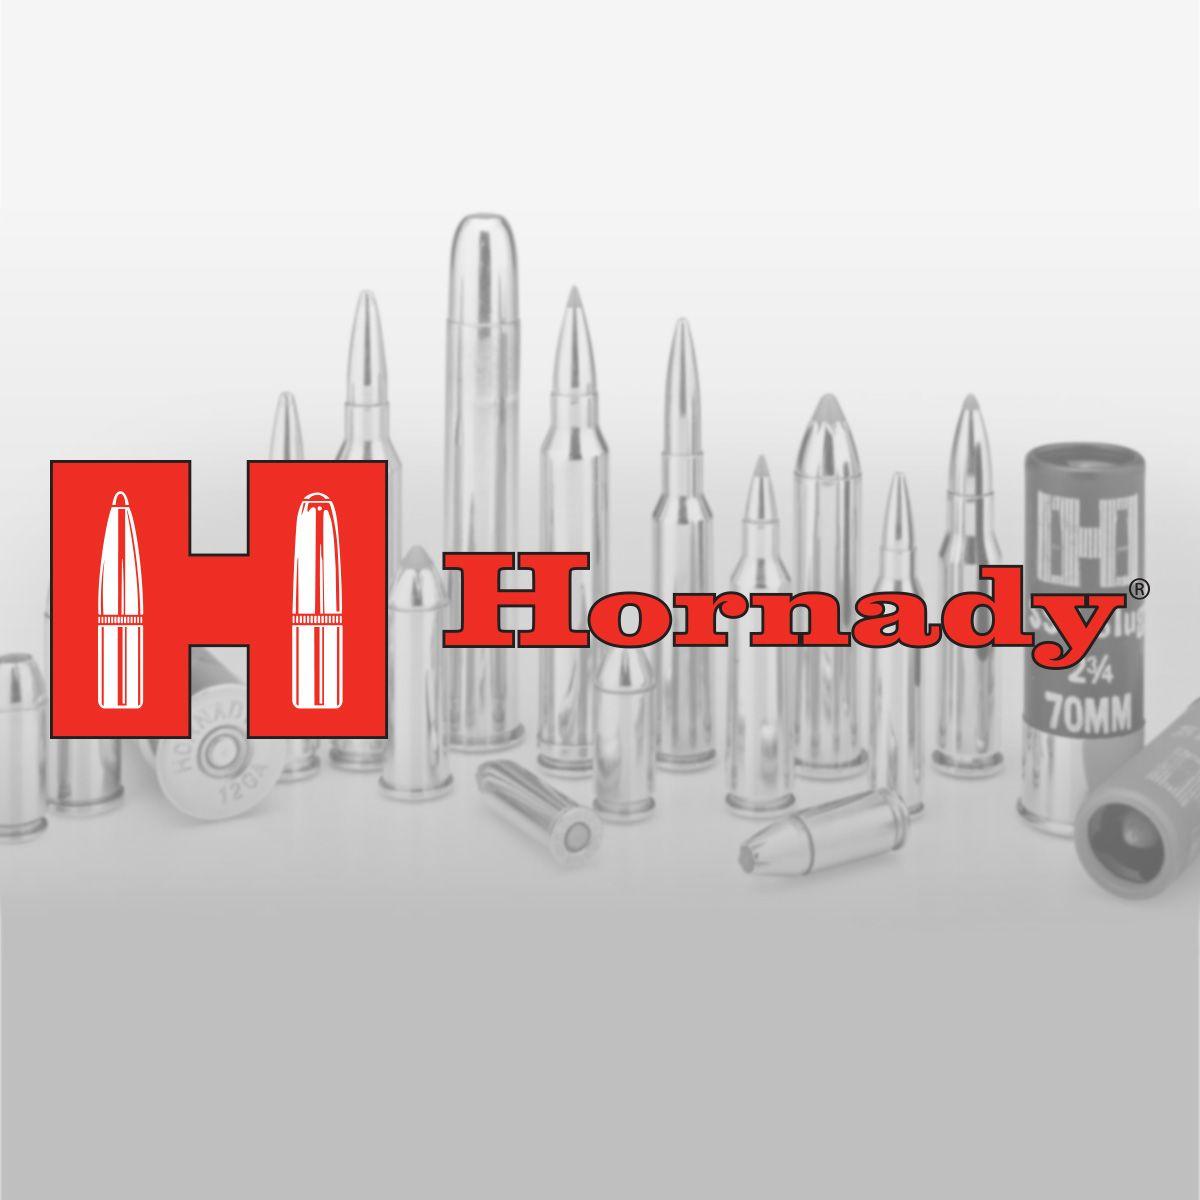 Team Hornady Logo - Accurate, Deadly, Dependable - Hornady Manufacturing, Inc